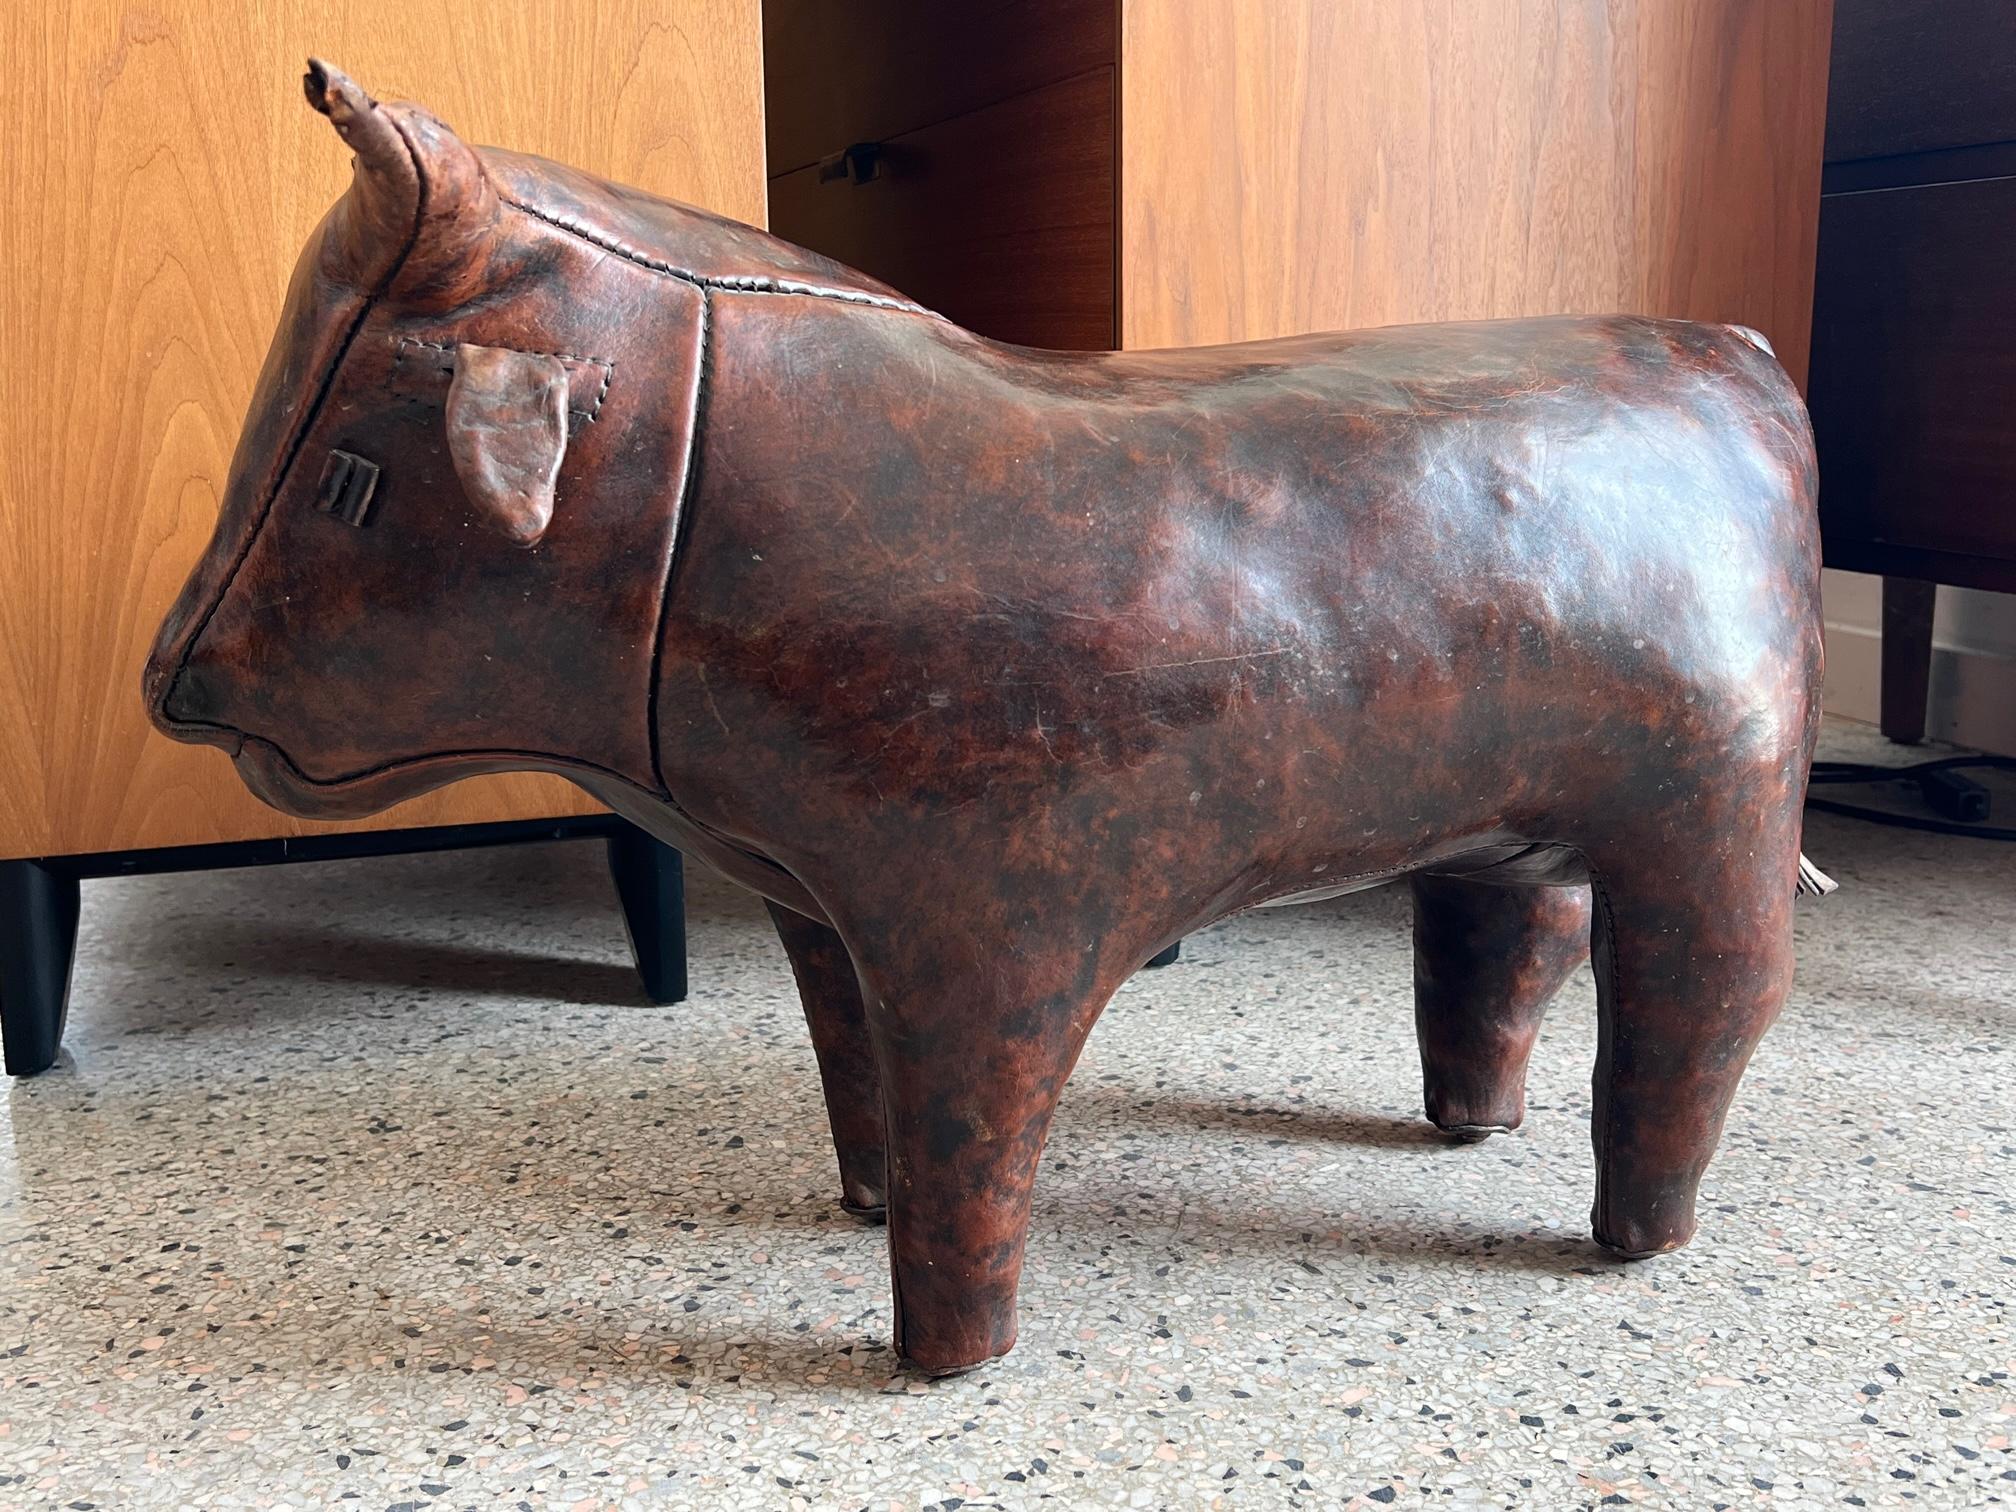 A leather bull-ottoman/footstool by Abercombie & Fitch, circa 1960s. Thick brown leather with beautiful patina and character.